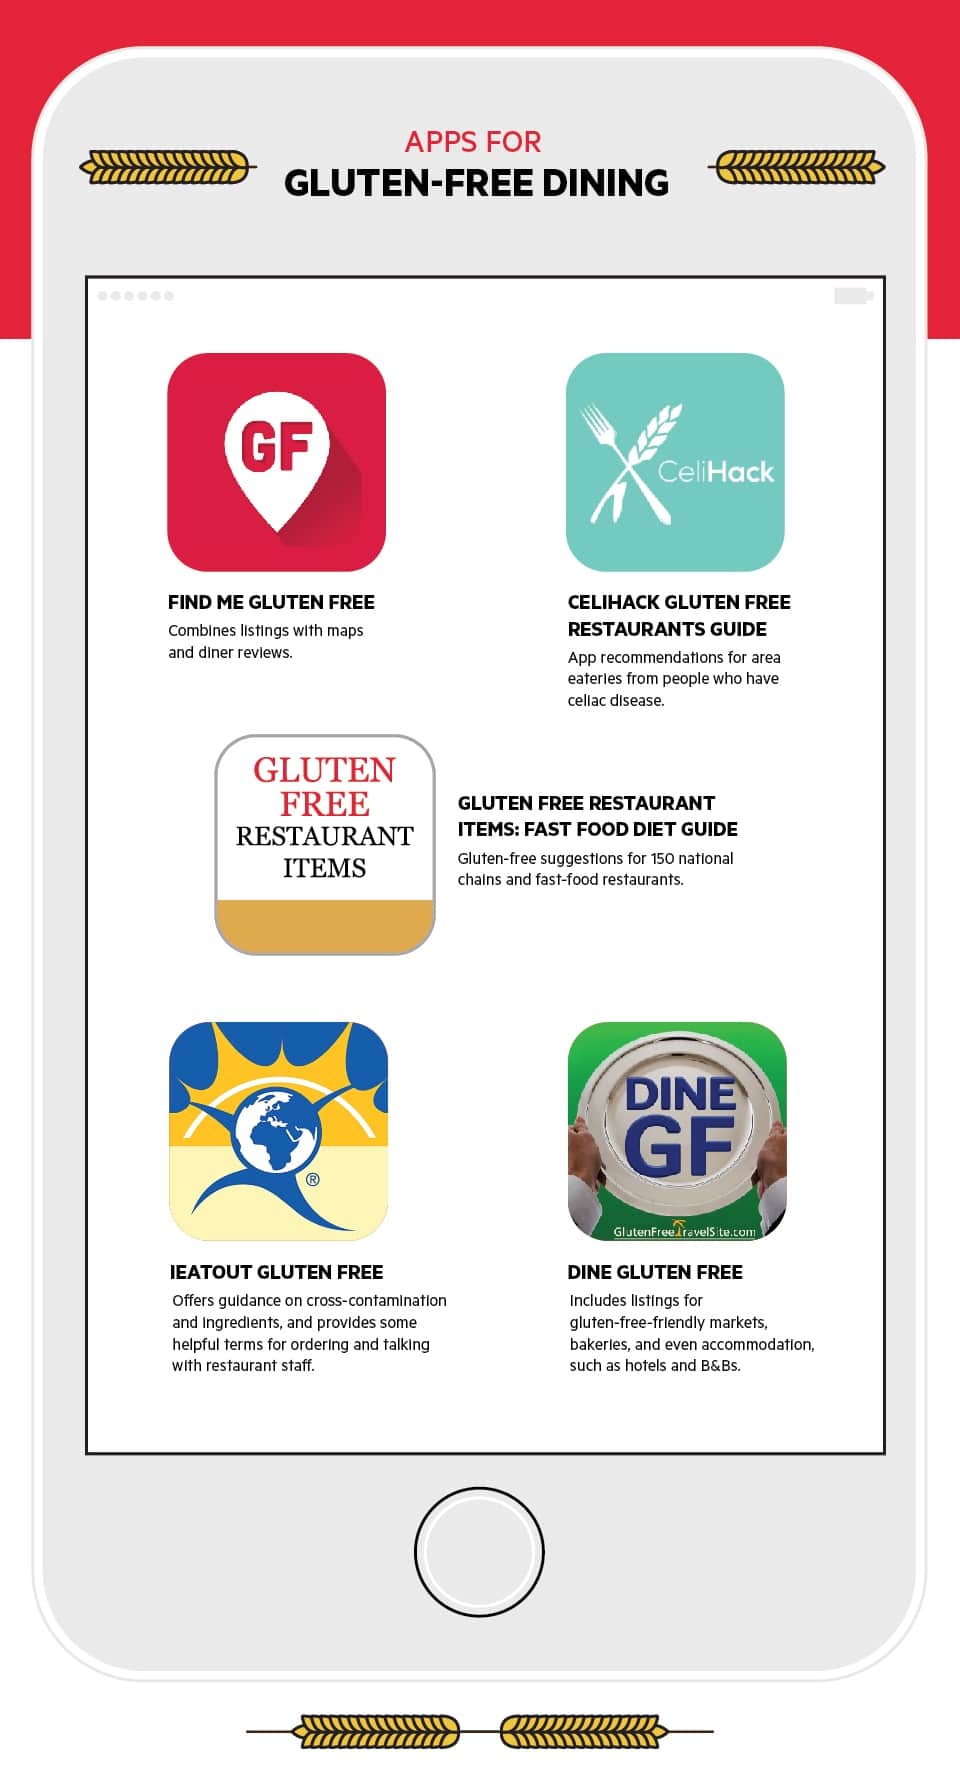 Apps For Gluten-Free Dining